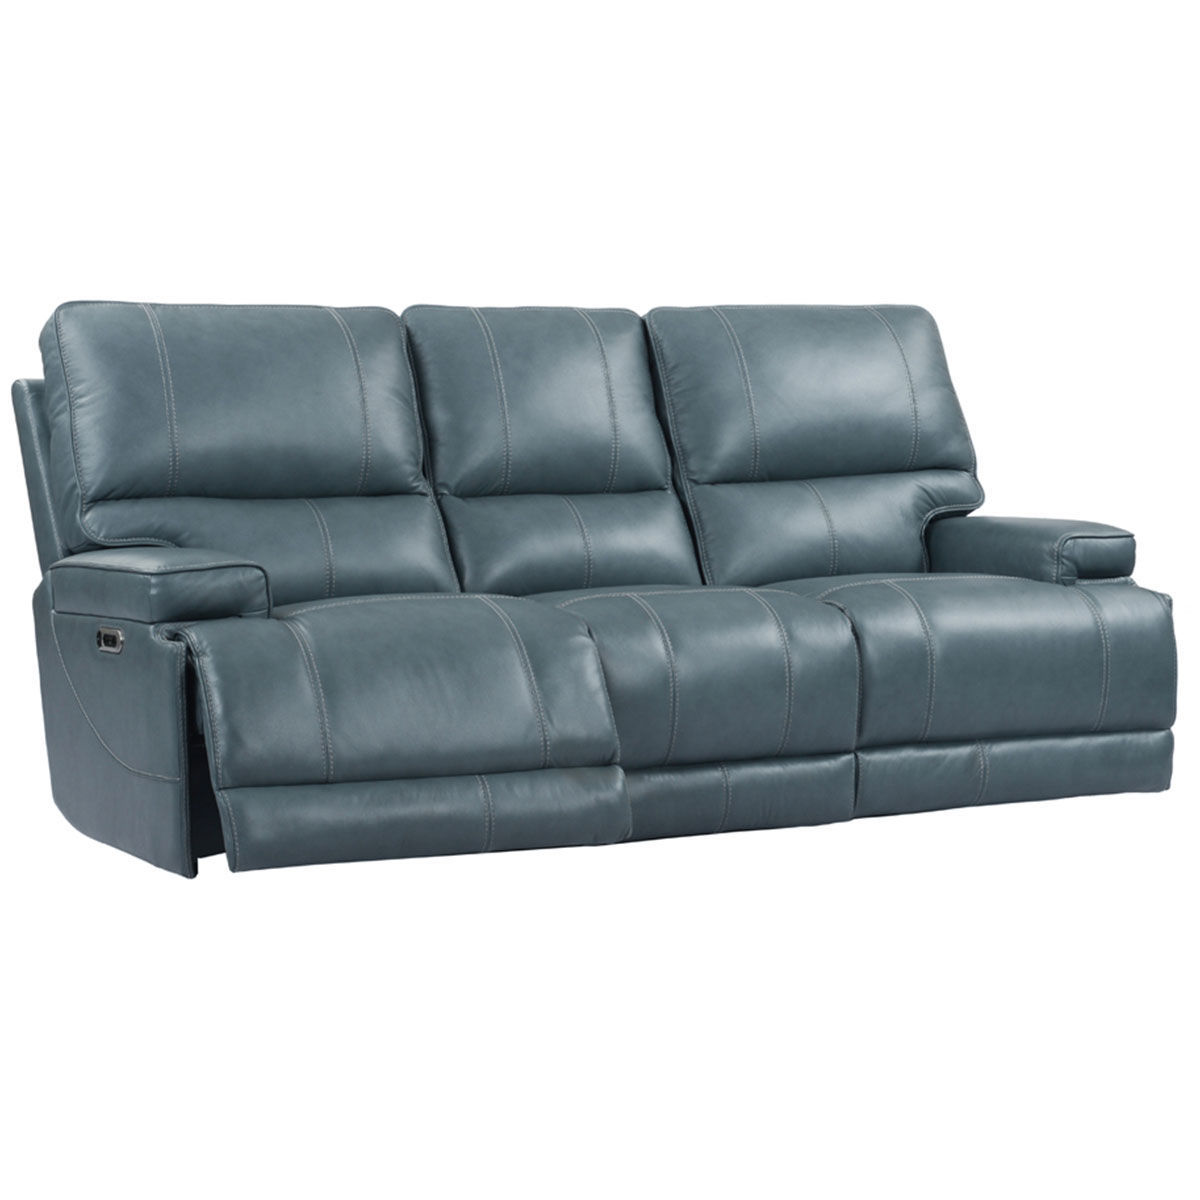 Picture of WHISTLER CORDLESS SOFA W/ POWER HEADREST IN AZURE